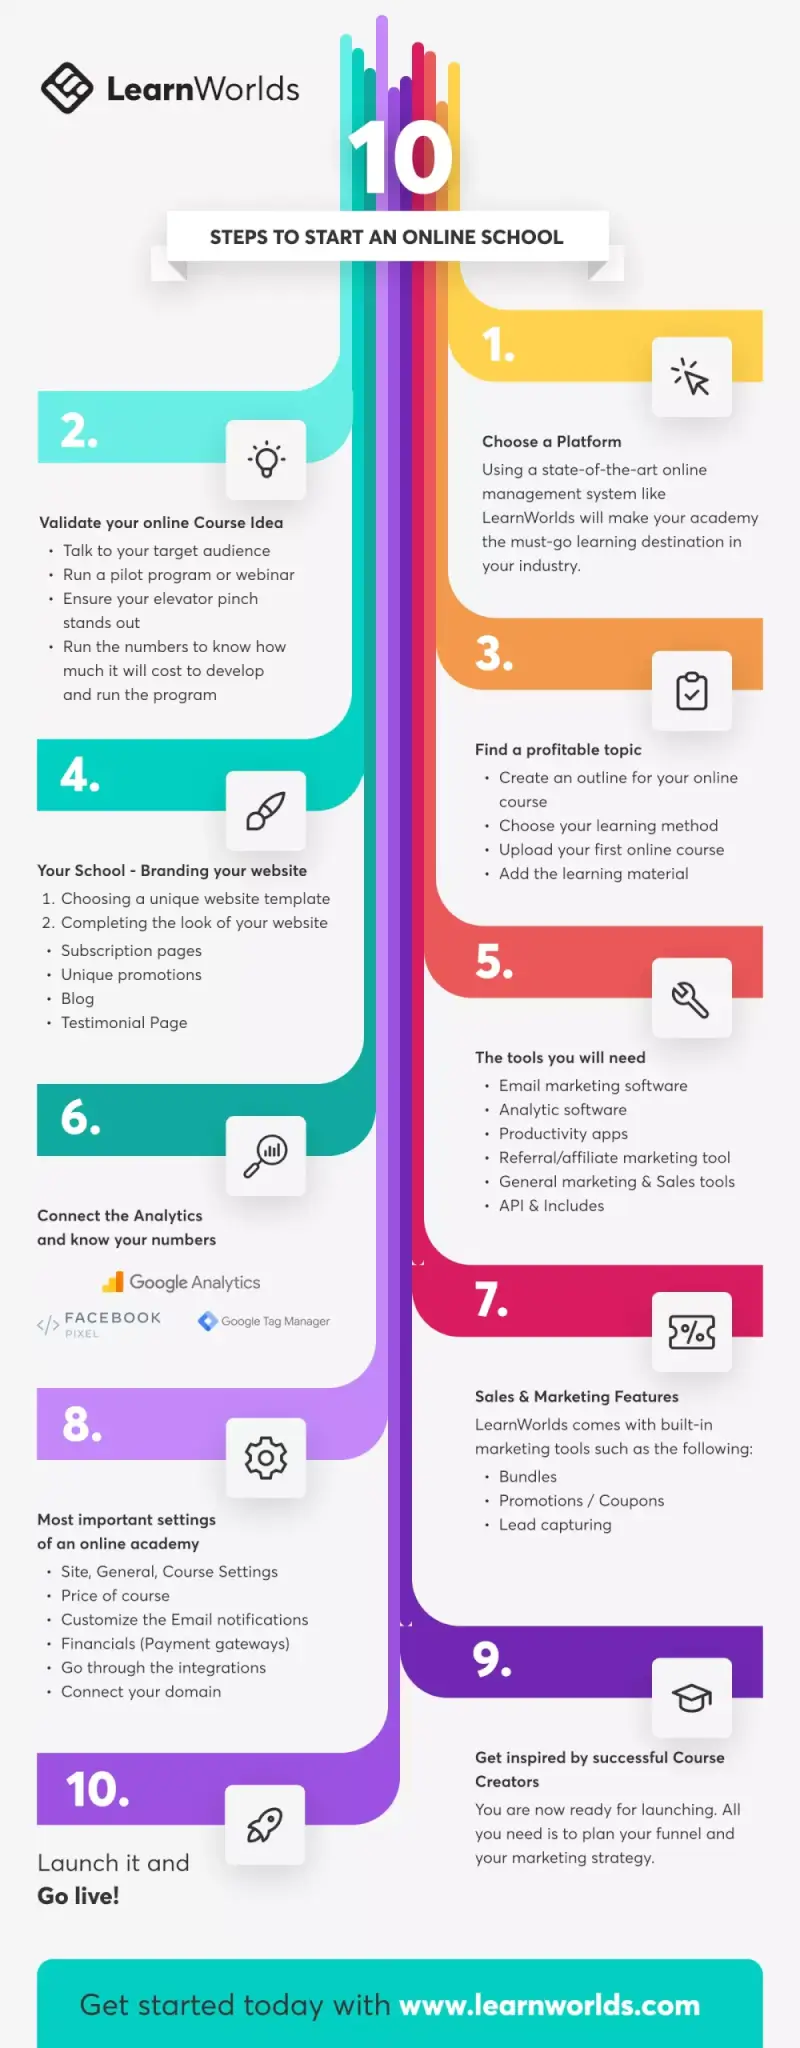 How to create an online school - 10 steps infographic